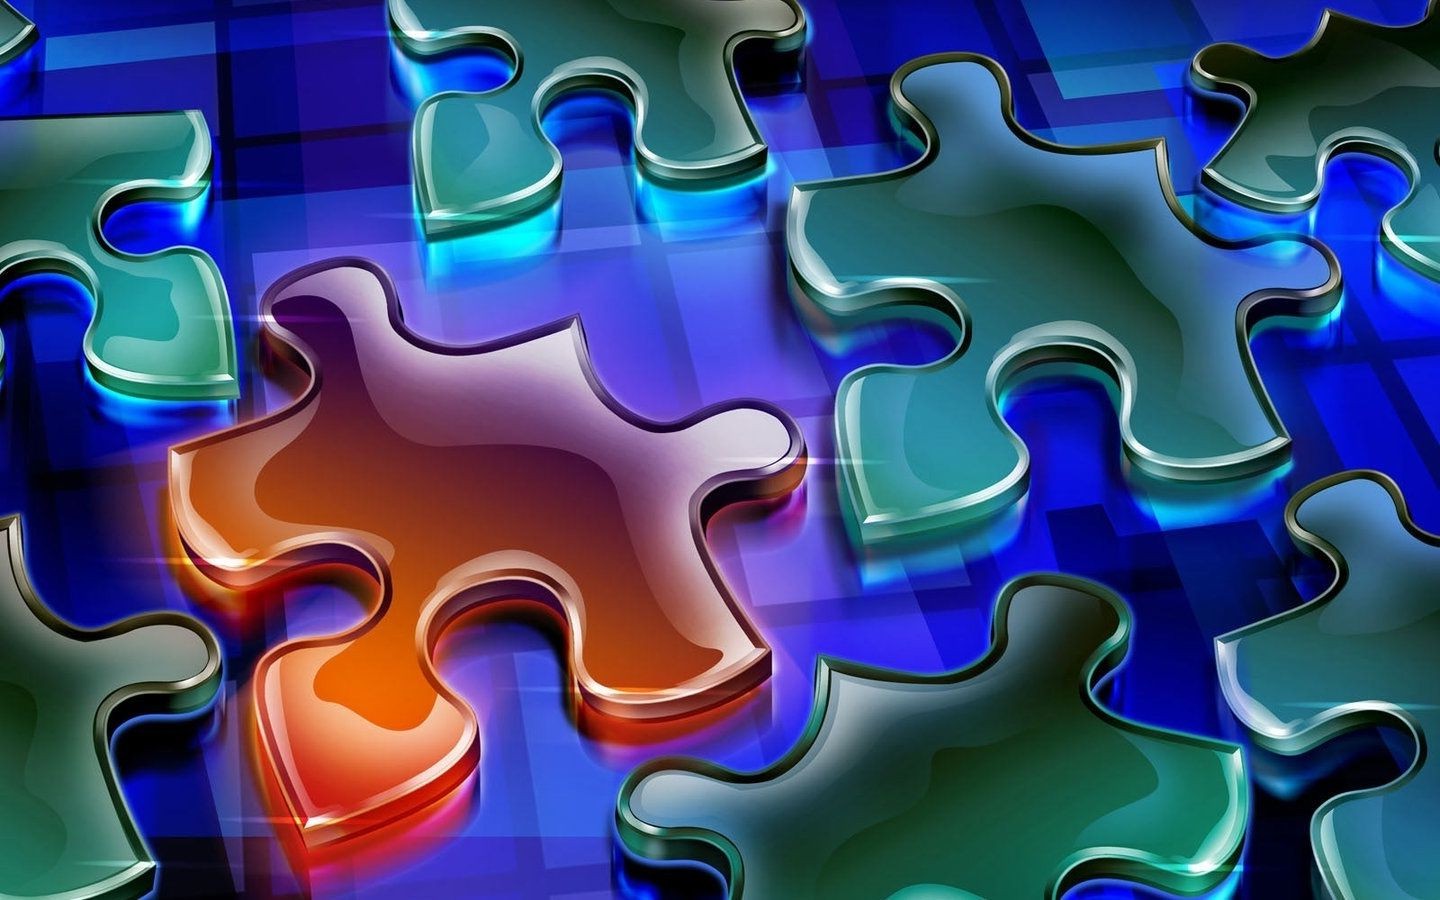 geometric shapes puzzle jigsaw connection piece solution abstract challenge game creativity pattern shape teamwork part strategy desktop assembly graphic color connect individuality